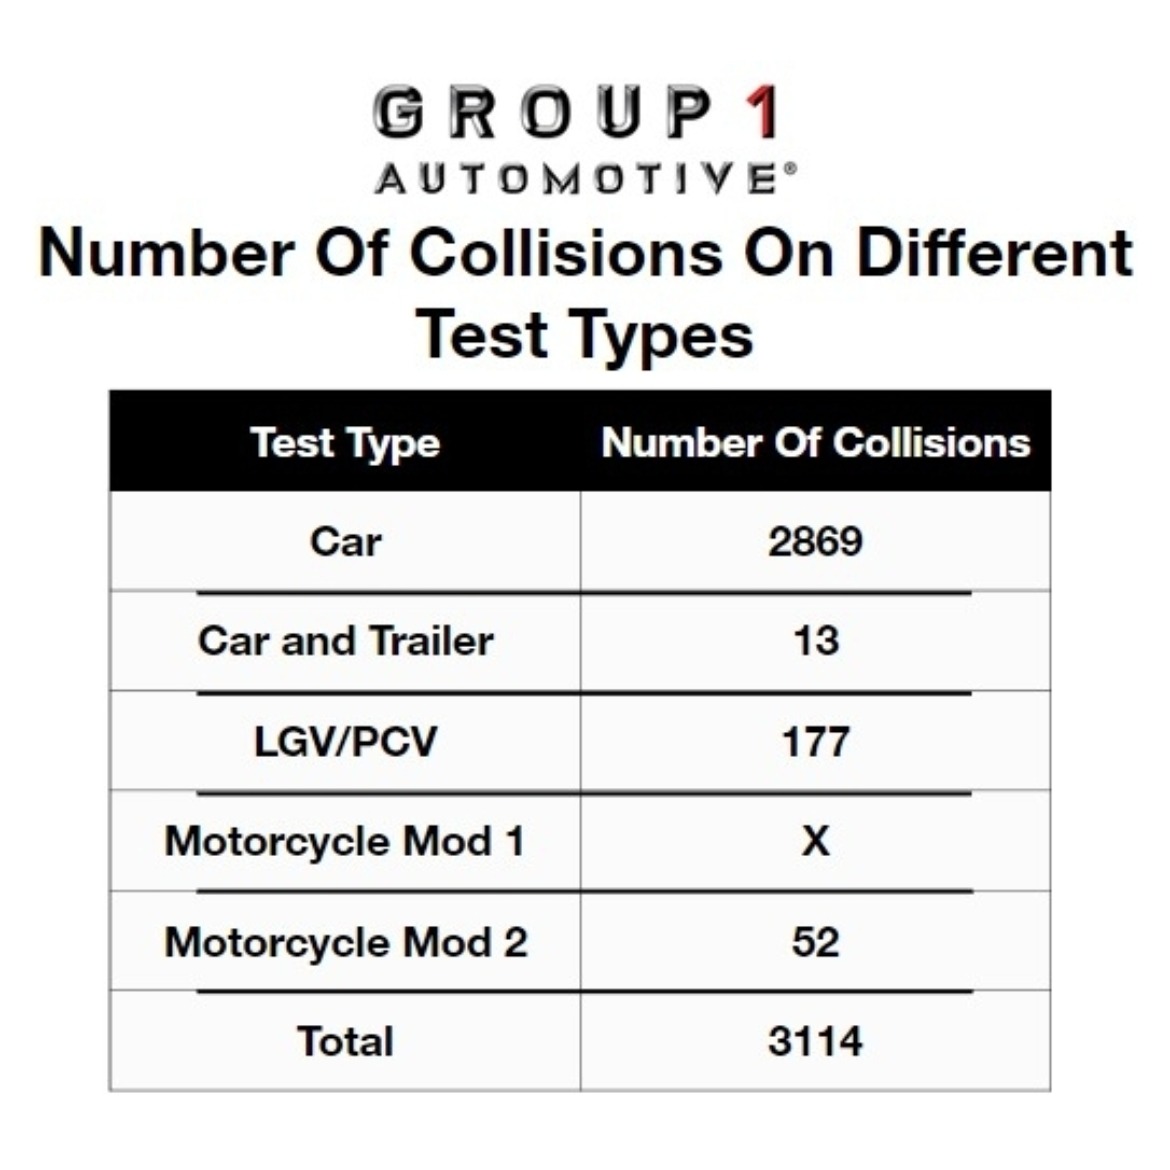 Graph showing the number of collisions on different test types